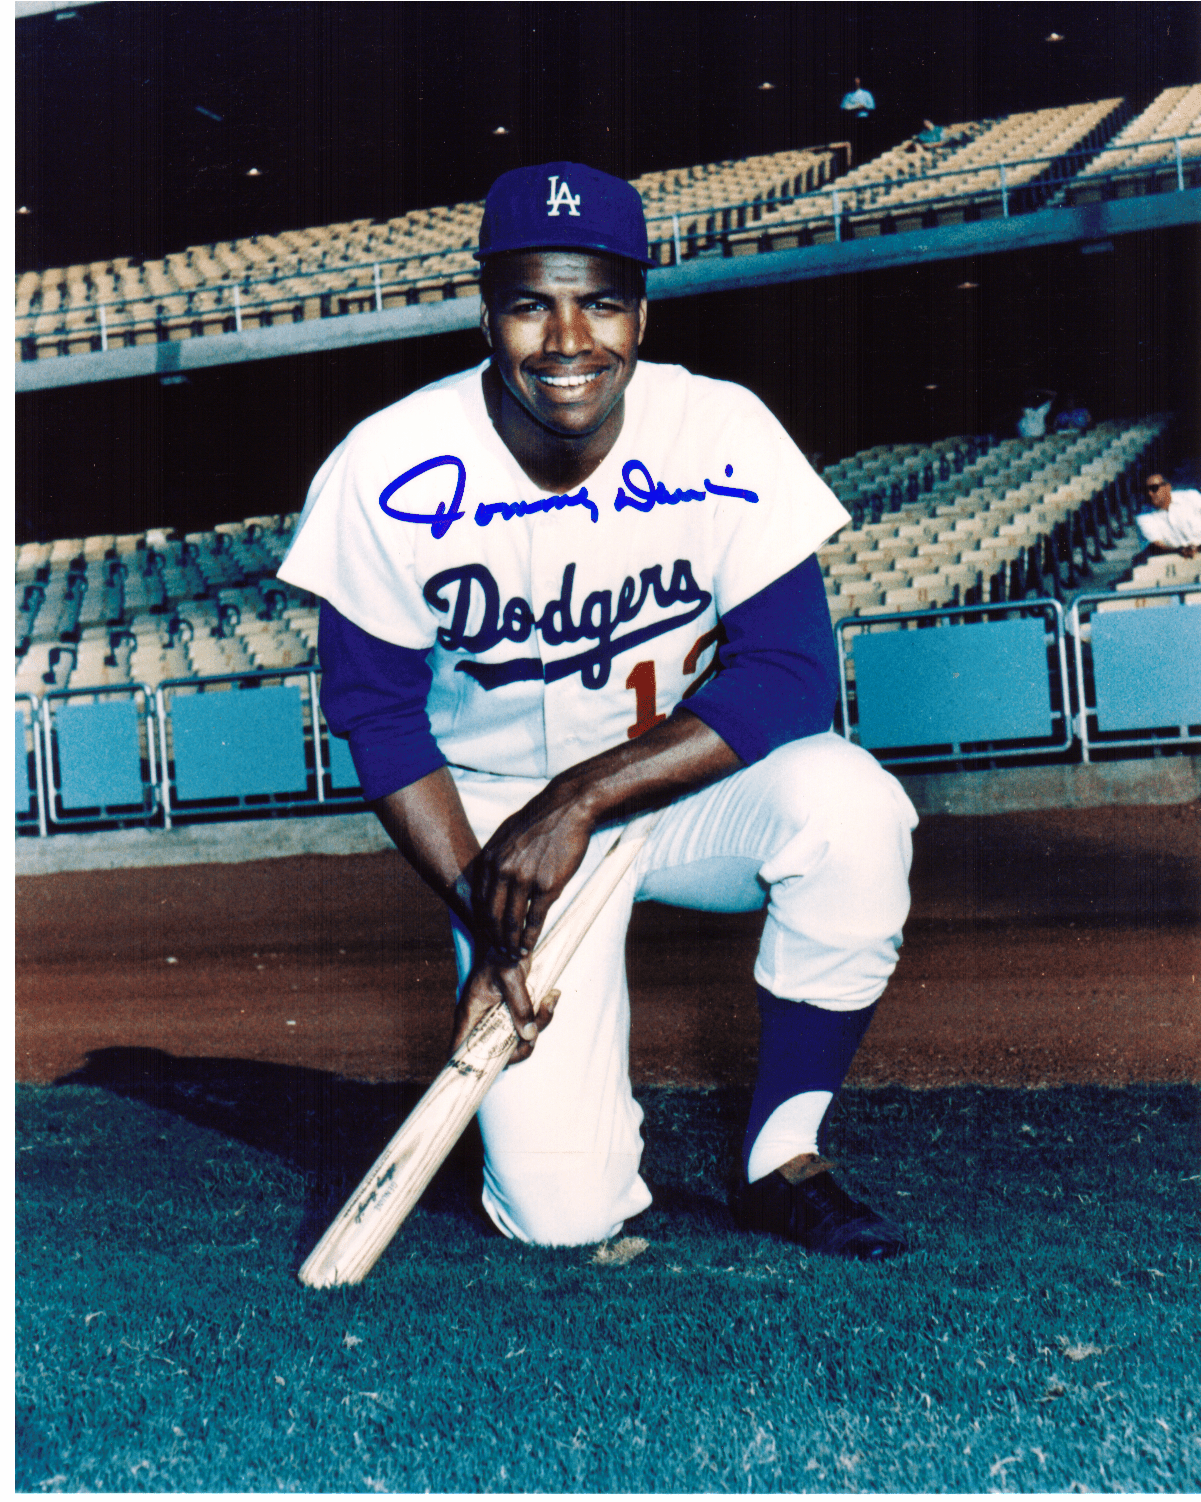 Who was Dodgers baseball player Tommy Davis?